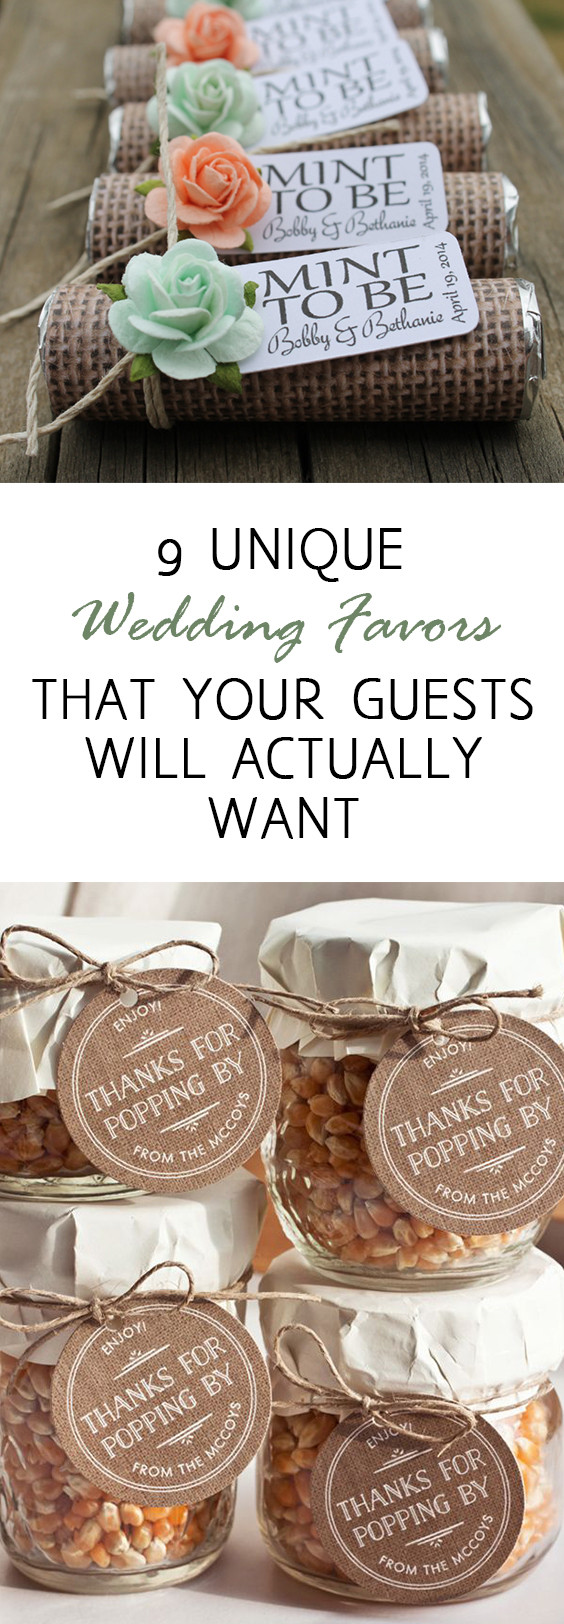 Cheap Wedding Favors DIY
 9 Unique Wedding Favors that Your Guests Will Actually